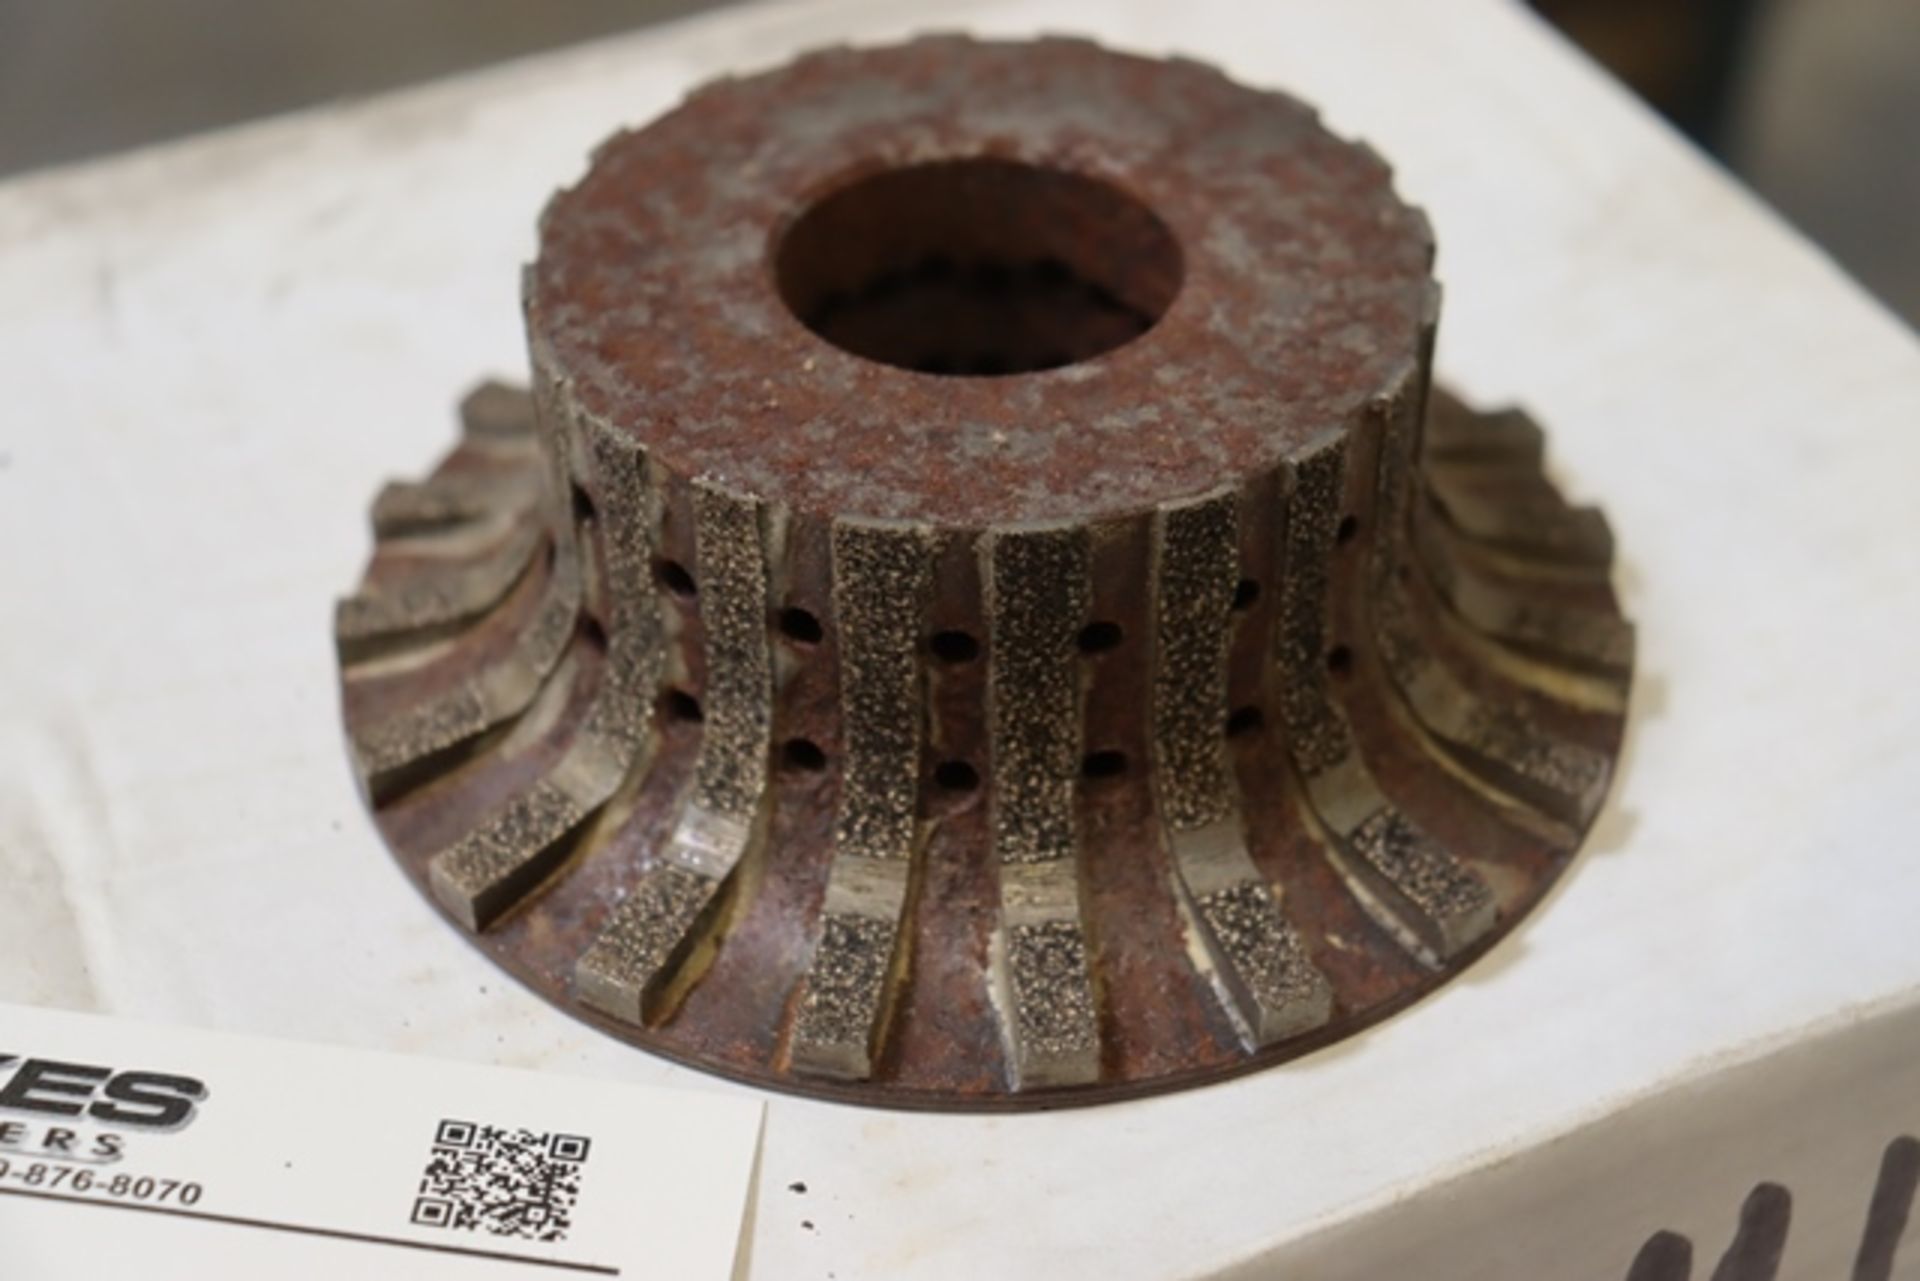 Times 5 - Used shaping wheels - Image 3 of 3